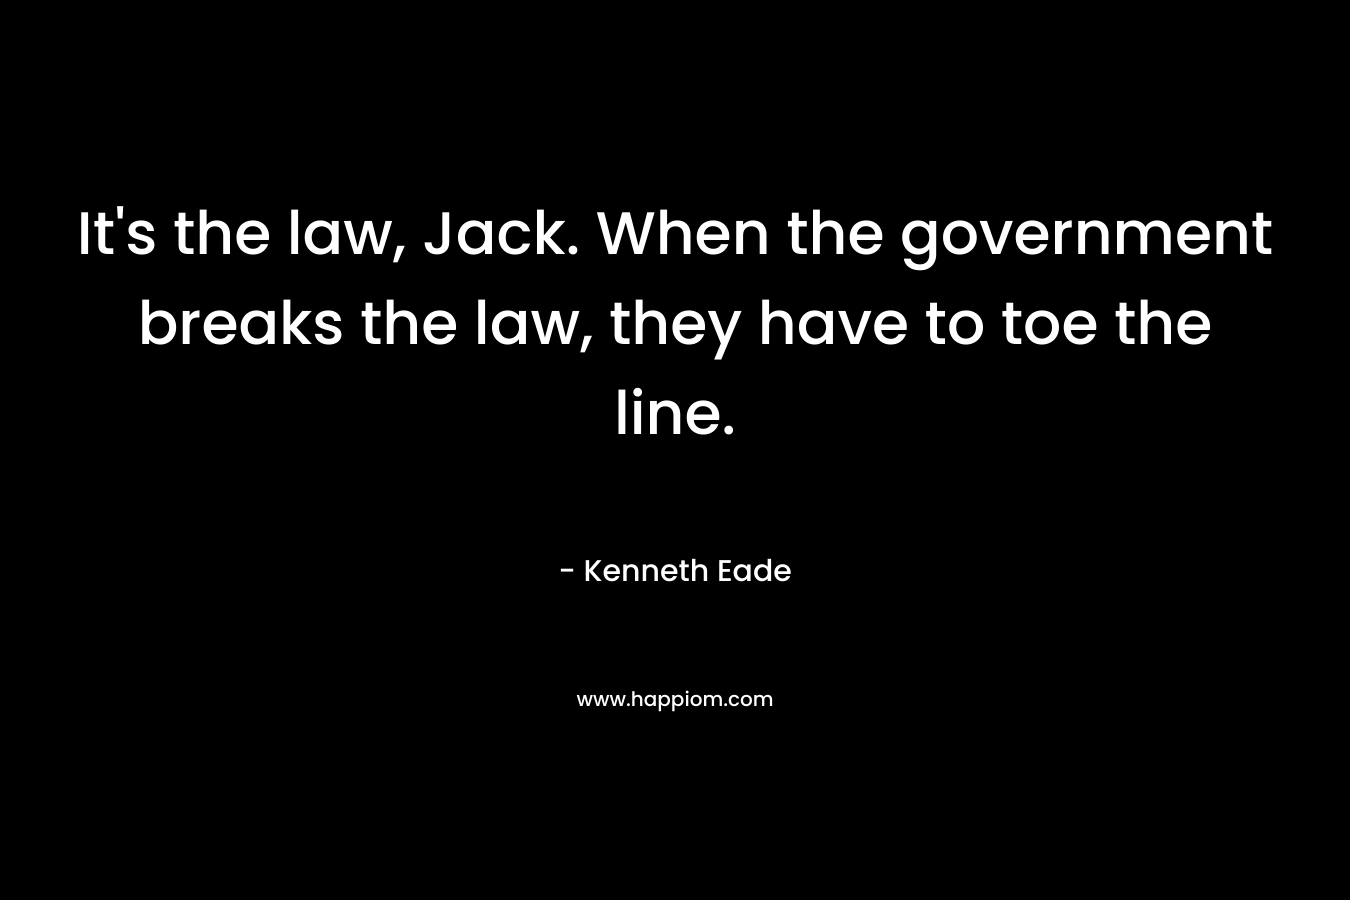 It’s the law, Jack. When the government breaks the law, they have to toe the line. – Kenneth Eade